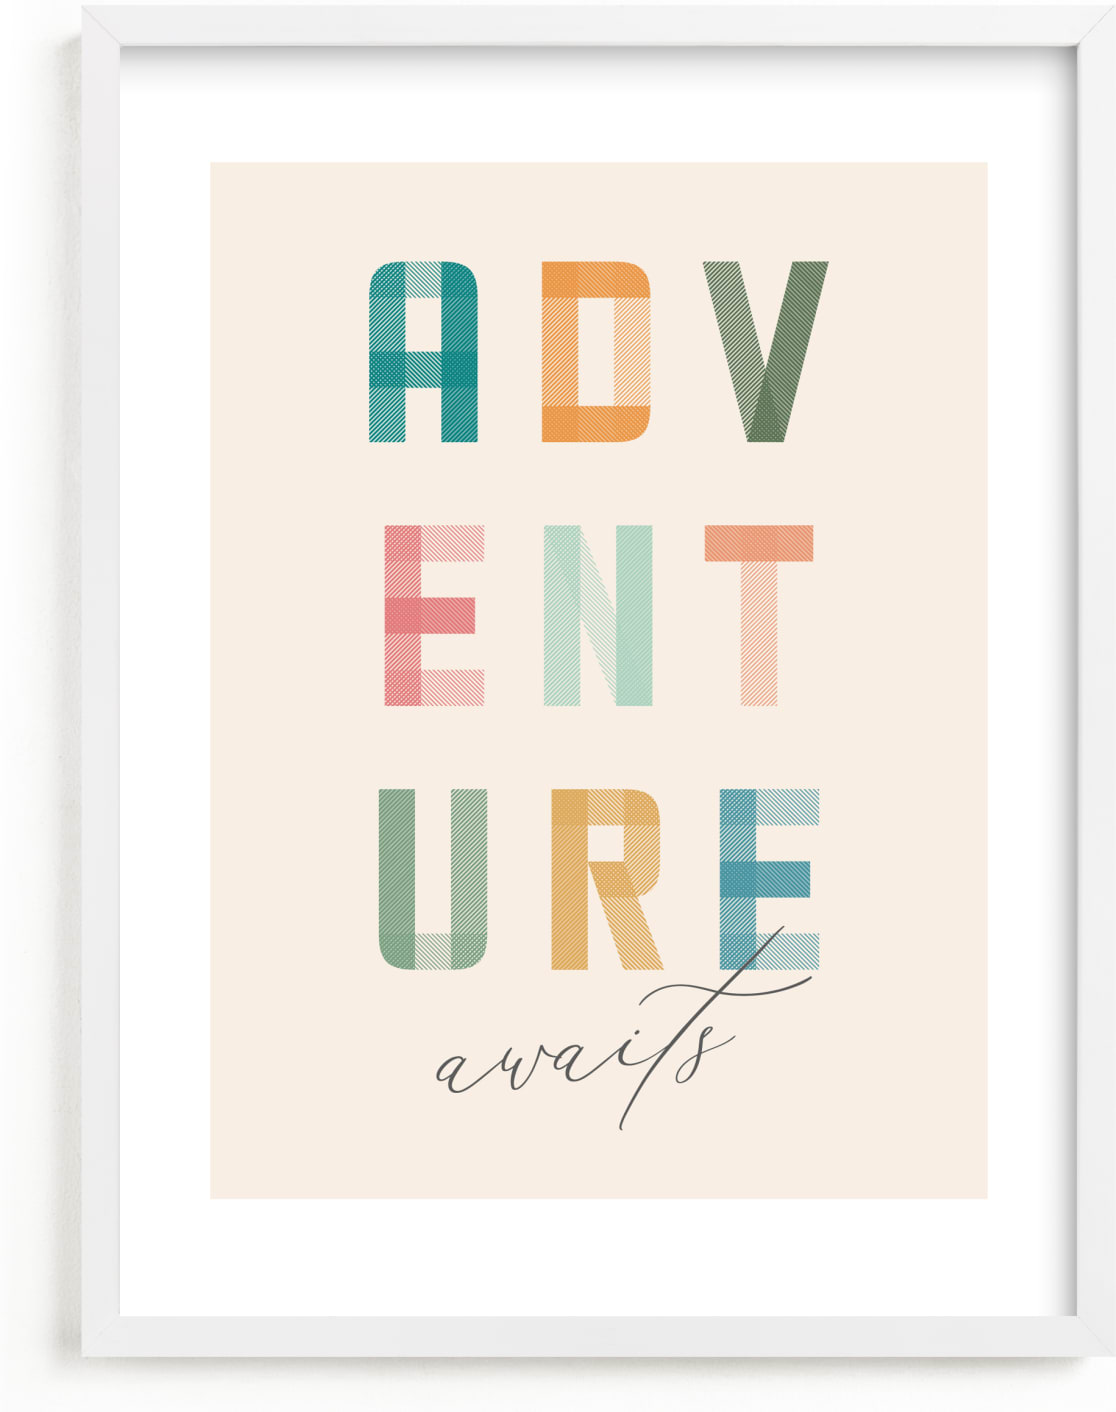 This is a colorful art by Brandy Folse called Adventure Lies Ahead.